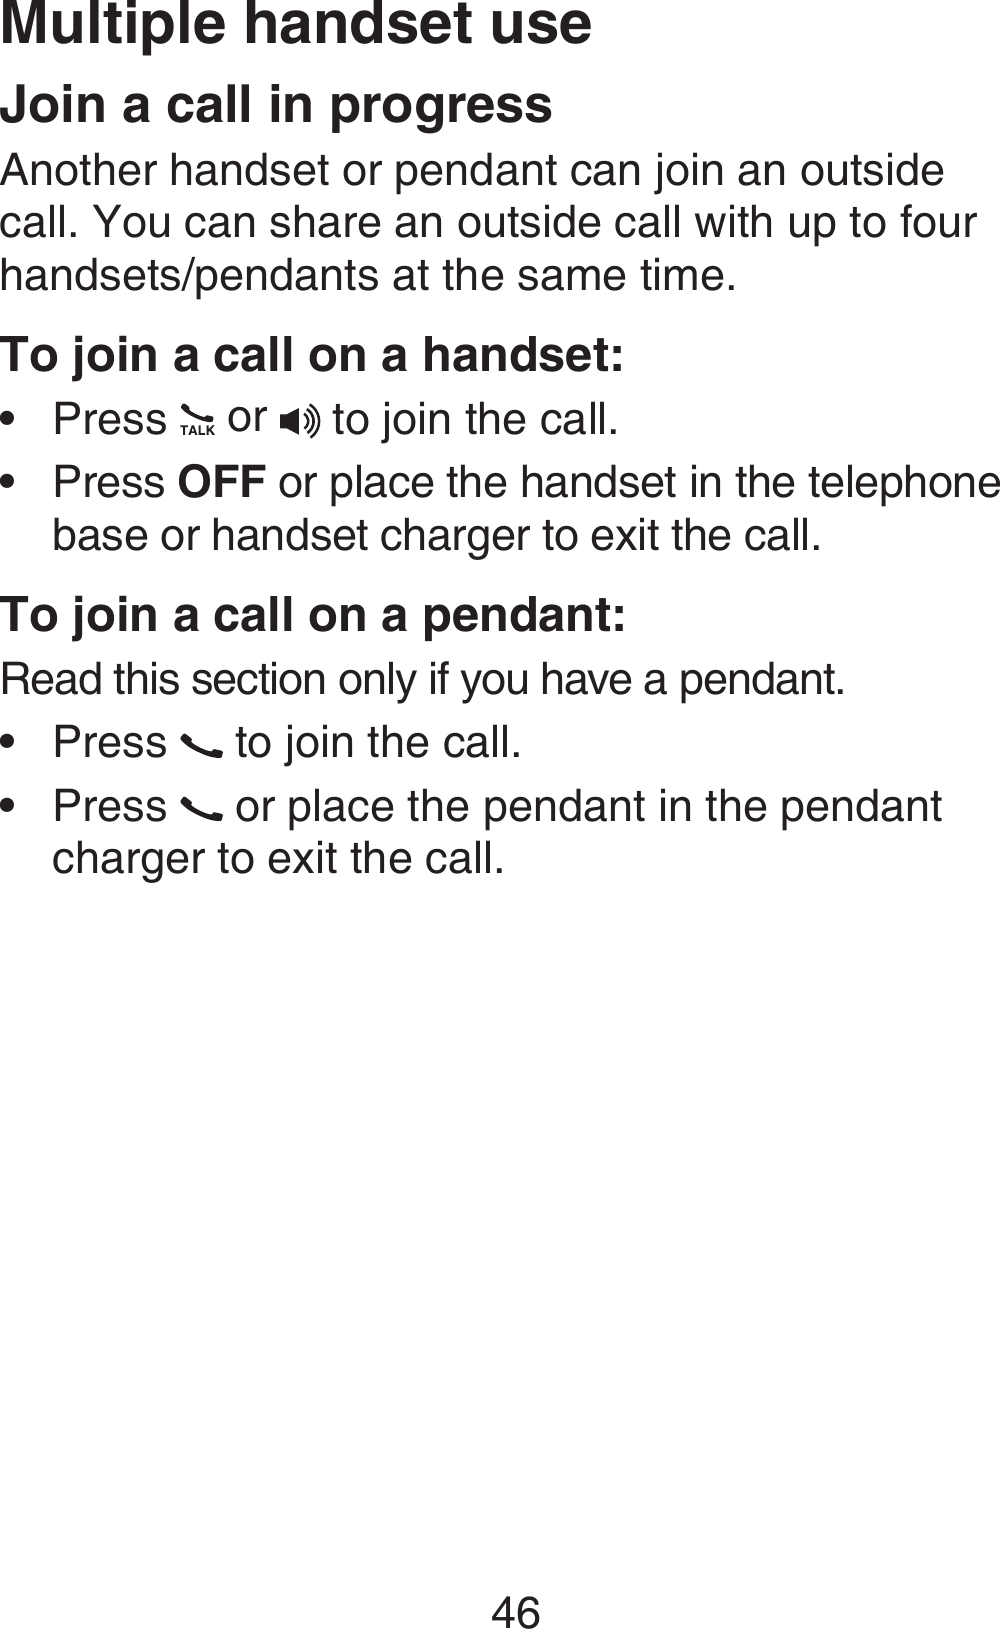 46Join a call in progressAnother handset or pendant can join an outside call. You can share an outside call with up to four handsets/pendants at the same time.To join a call on a handset:Press   or  to join the call.Press OFF or place the handset in the telephone base or handset charger to exit the call.To join a call on a pendant:Read this section only if you have a pendant.Press   to join the call.Press   or place the pendant in the pendant charger to exit the call. ••••Multiple handset use